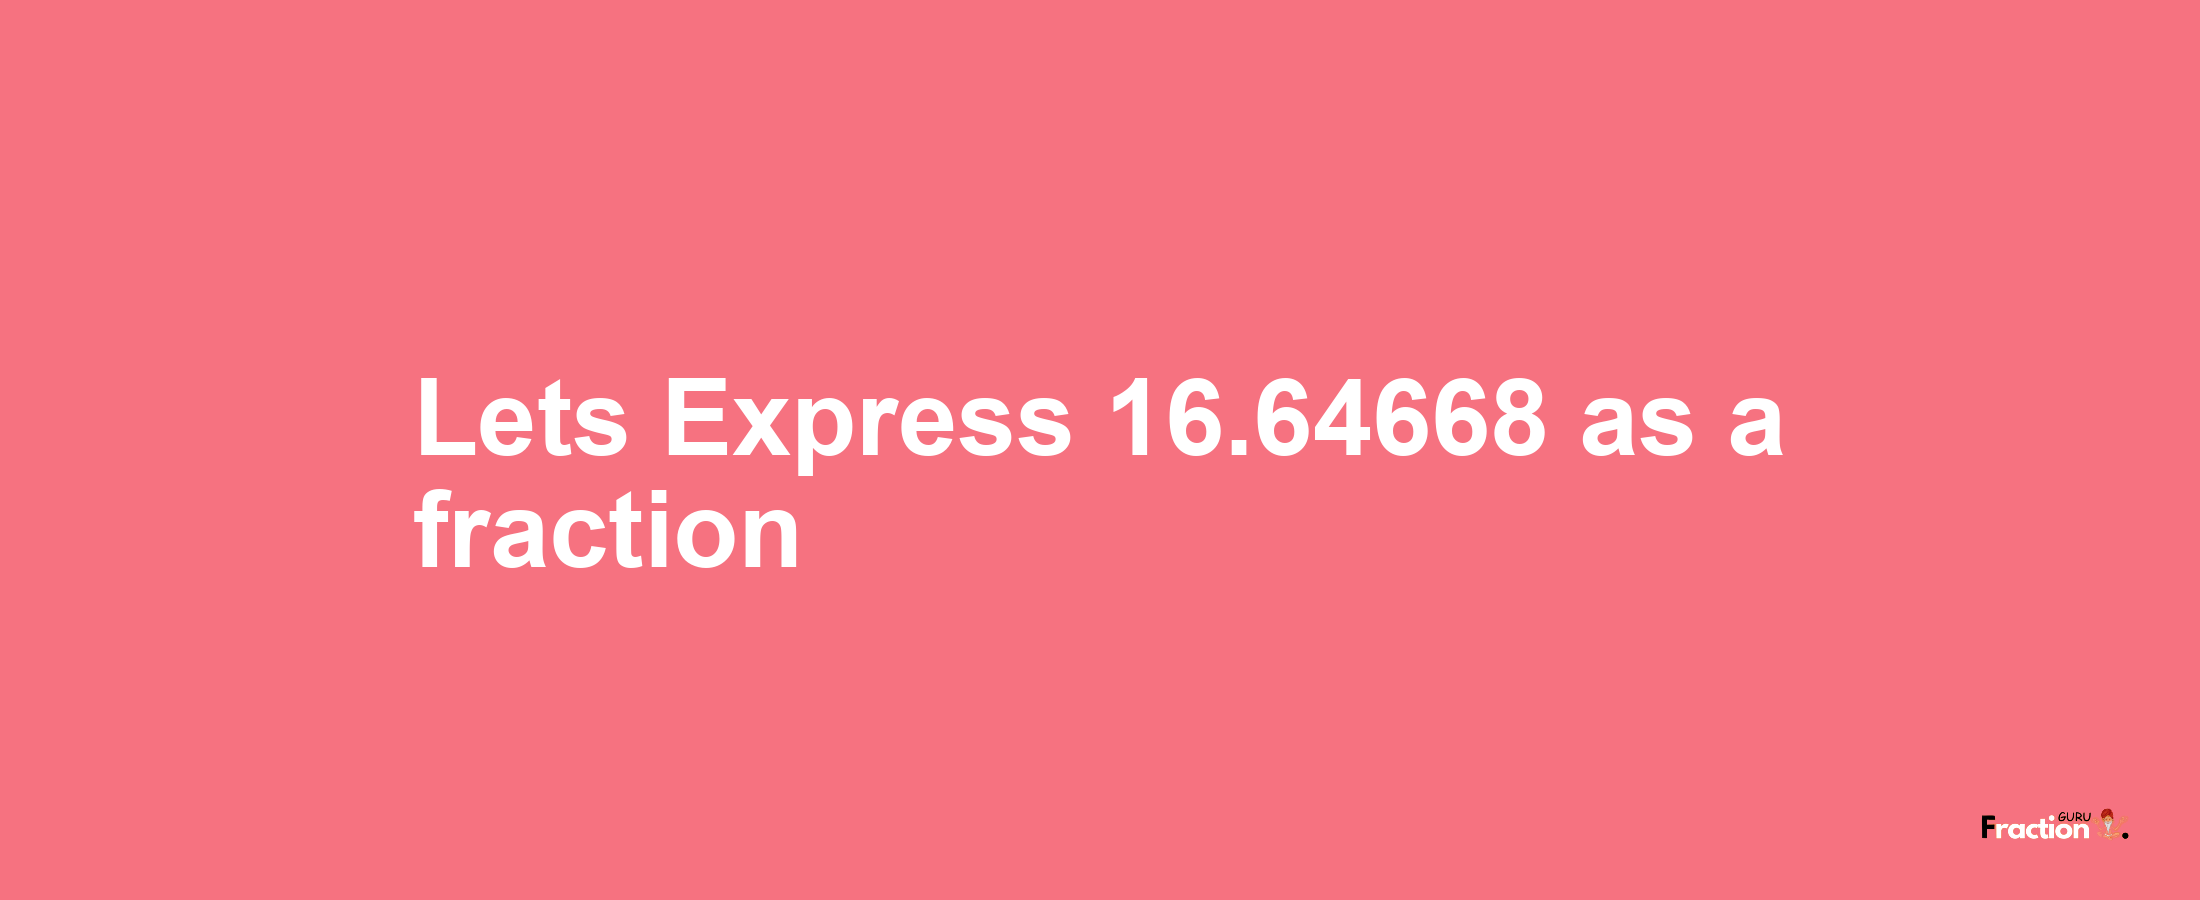 Lets Express 16.64668 as afraction